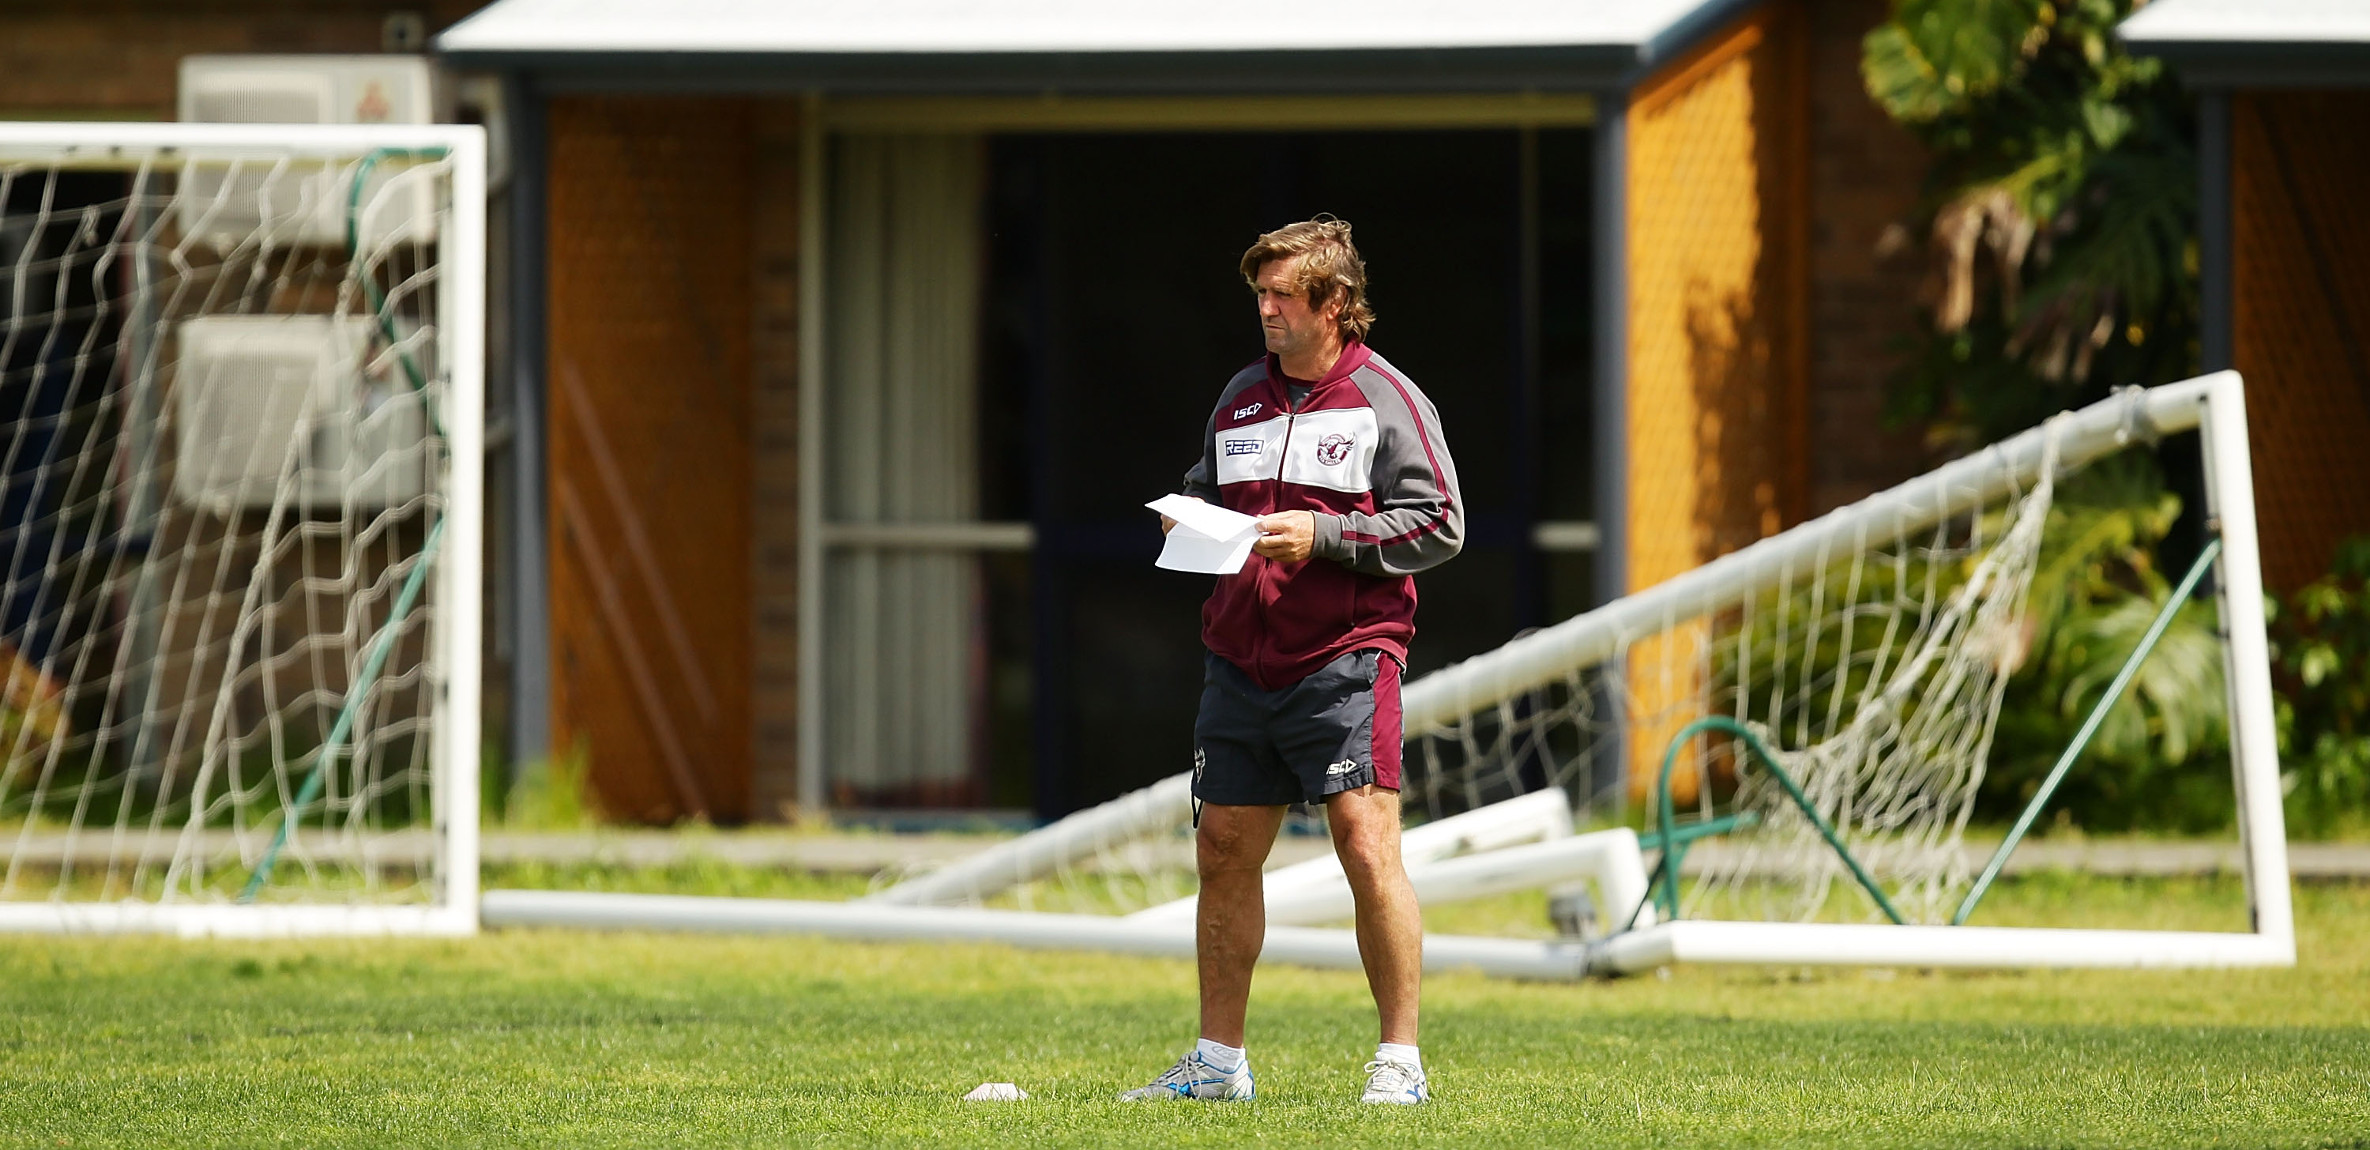 Sea Eagles coach Des Hasler looks on during a Manly Warringah Sea Eagles NRL training session